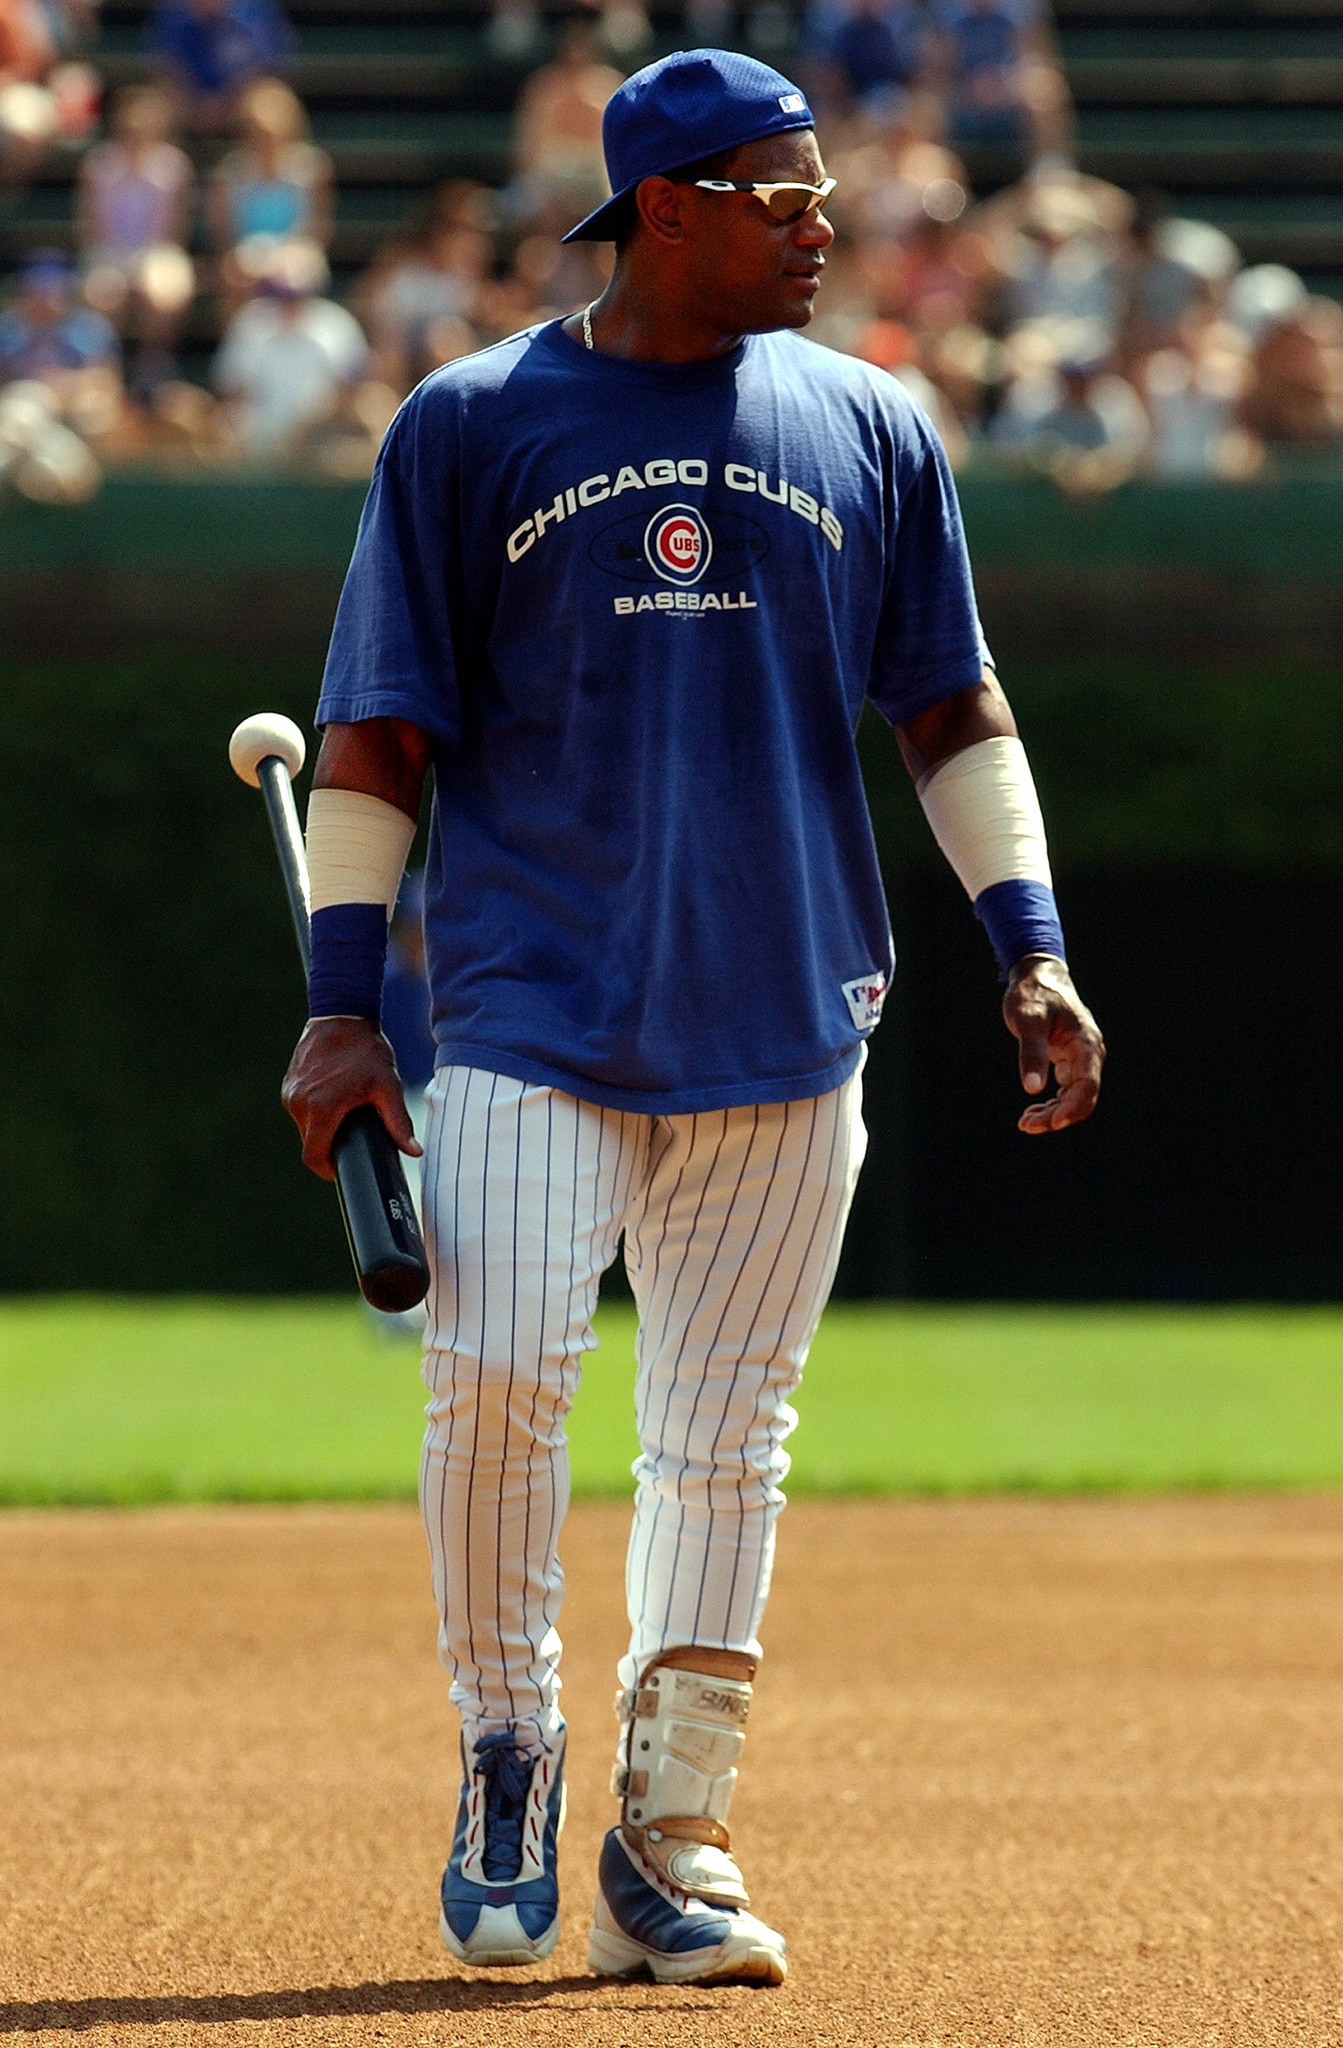 This Day in Chicago Sports on X: 𝐌𝐚𝐫𝐜𝐡 𝟑𝟎, 𝟏𝟗𝟗𝟐 The White Sox  traded Sammy Sosa to the Cubs in exchange for George Bell. Sammy went o